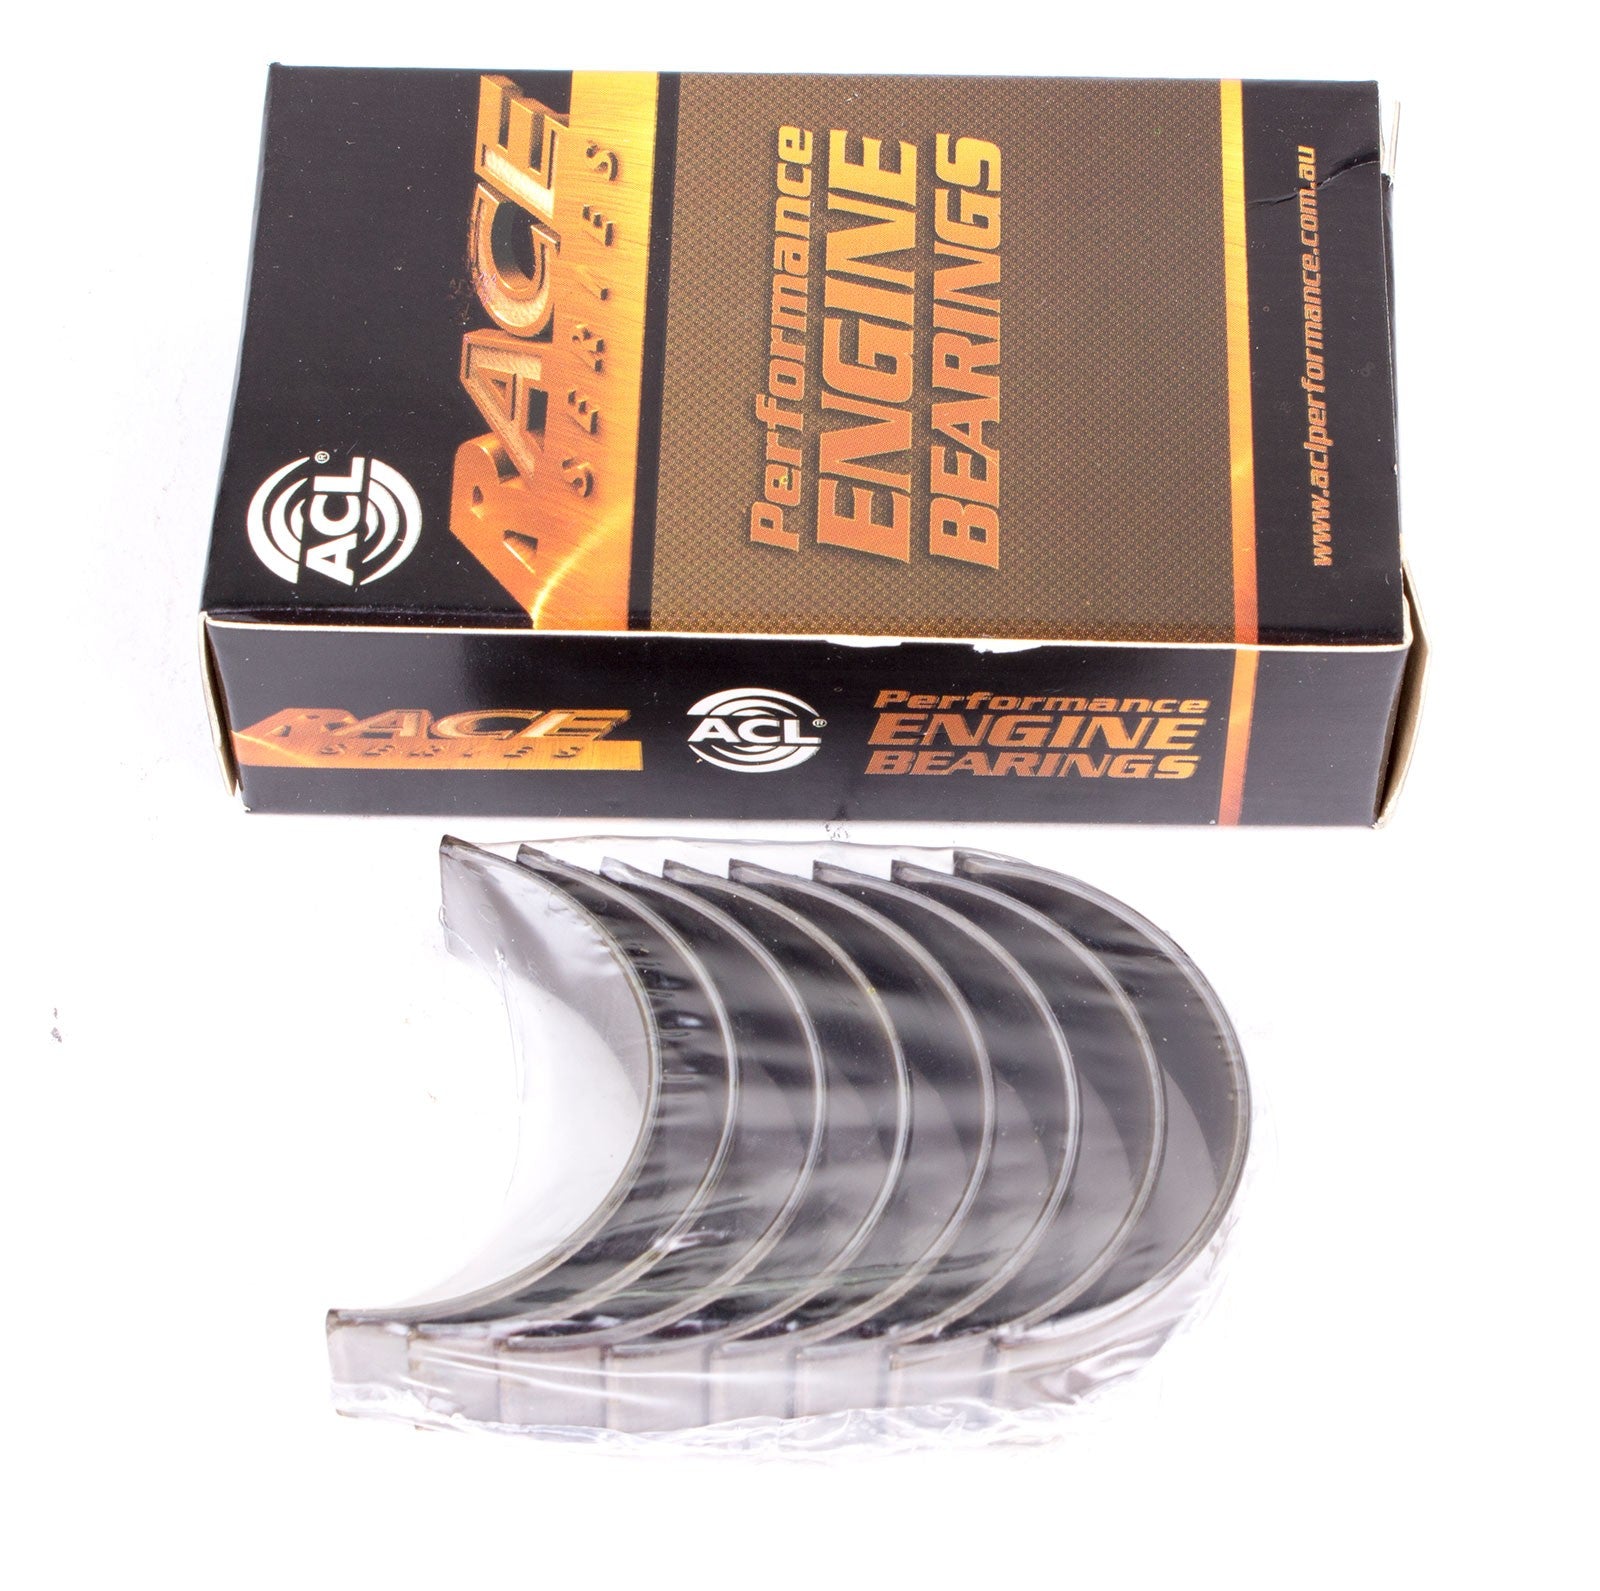 ACL 5M2015H-.25 Main bearing set (ACL Race Series) Photo-0 